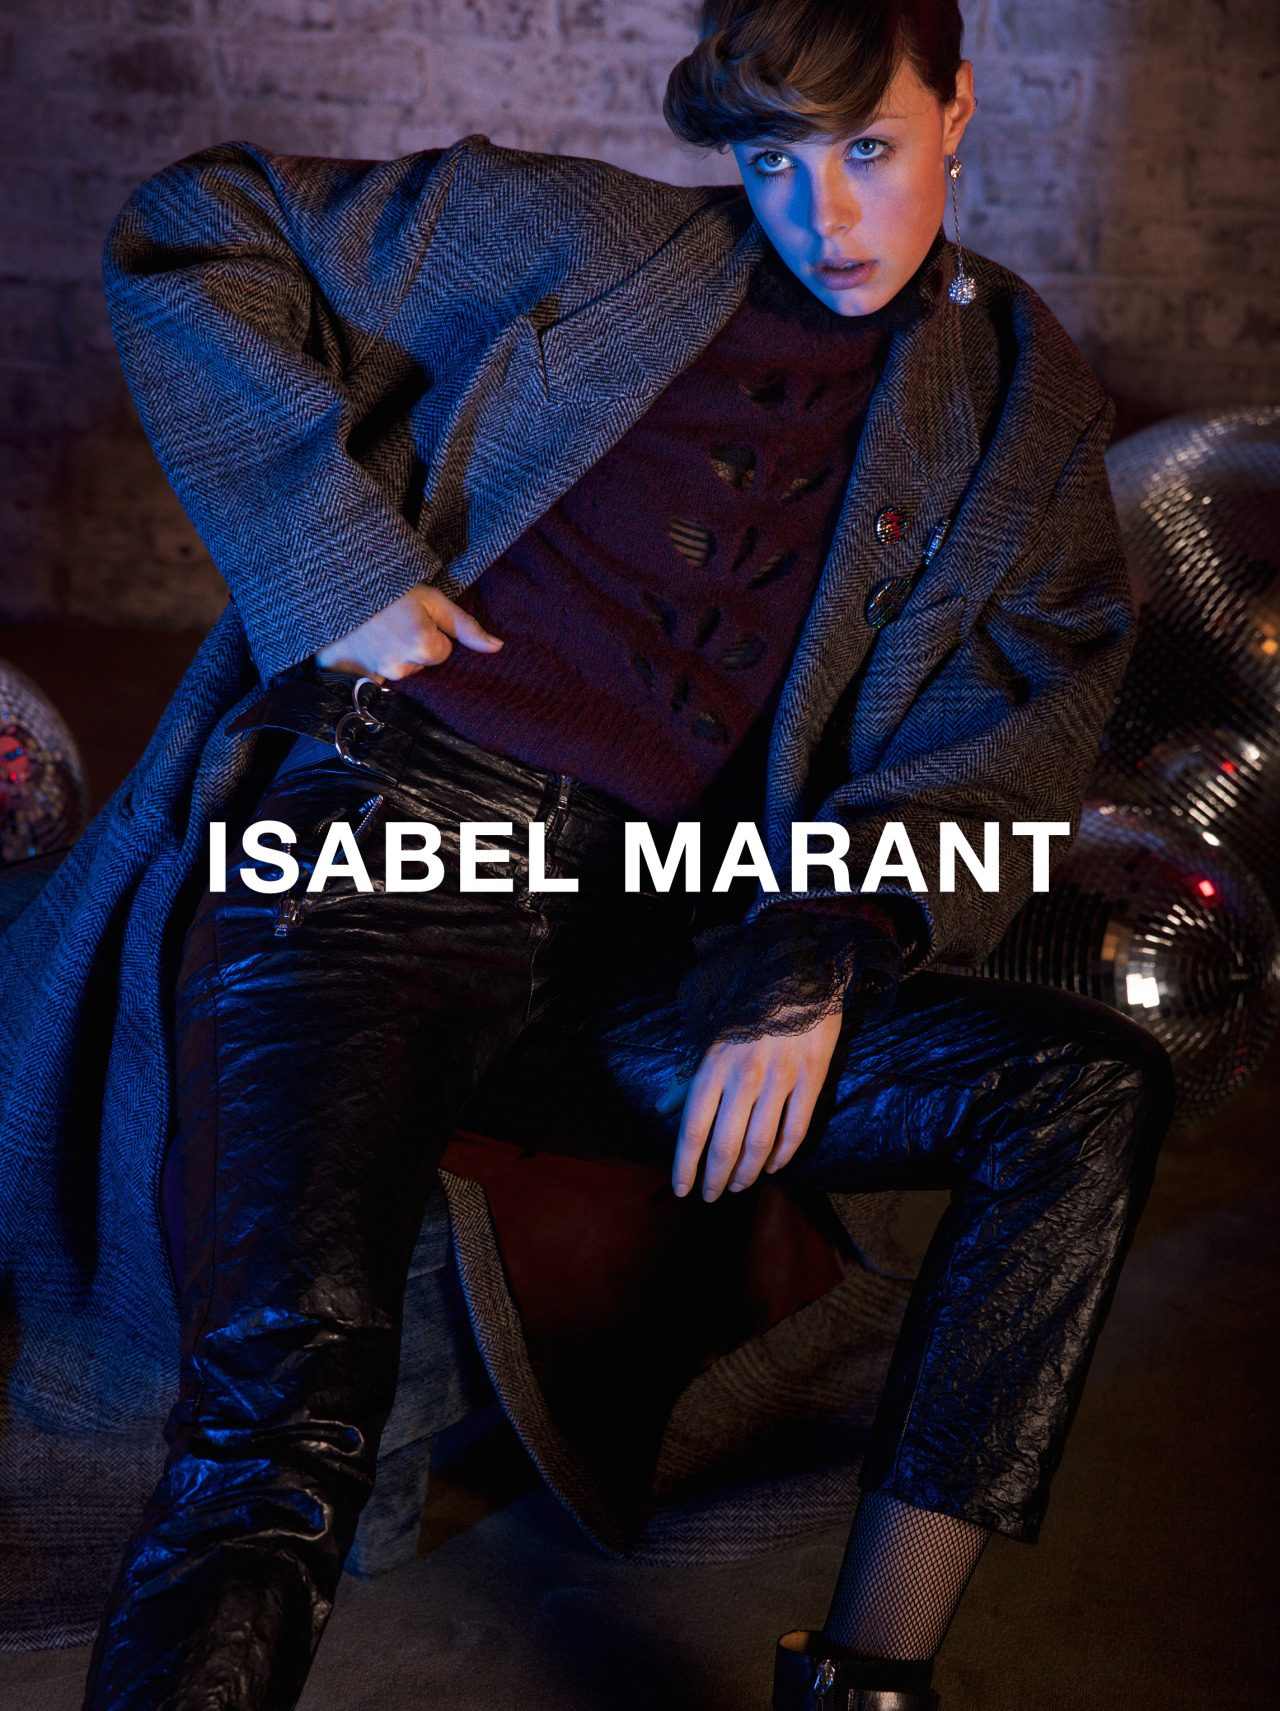 A visual from the Isabel Marant Fall 2016 ad campaign, featuring Edie Campbell.